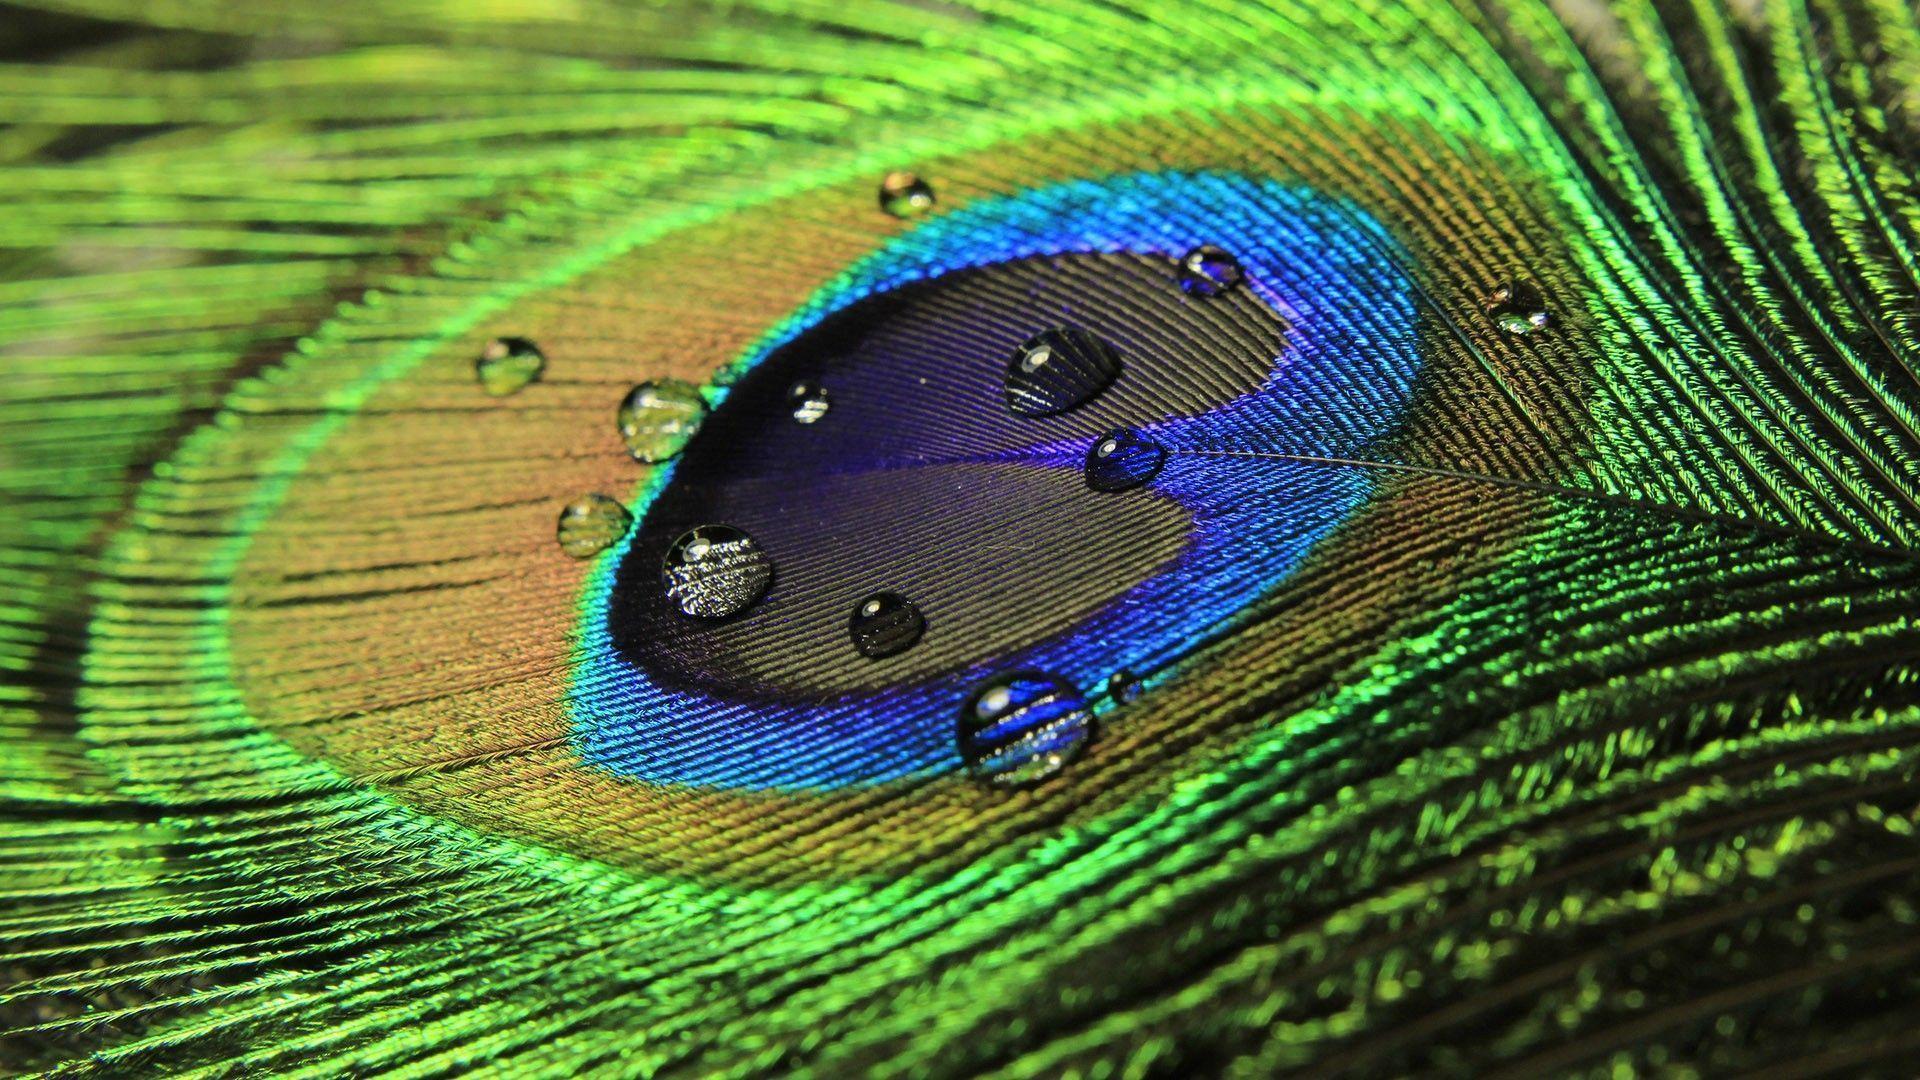 Peacock Feather Desktop Wallpaper. Peacock Feather Image. Cool